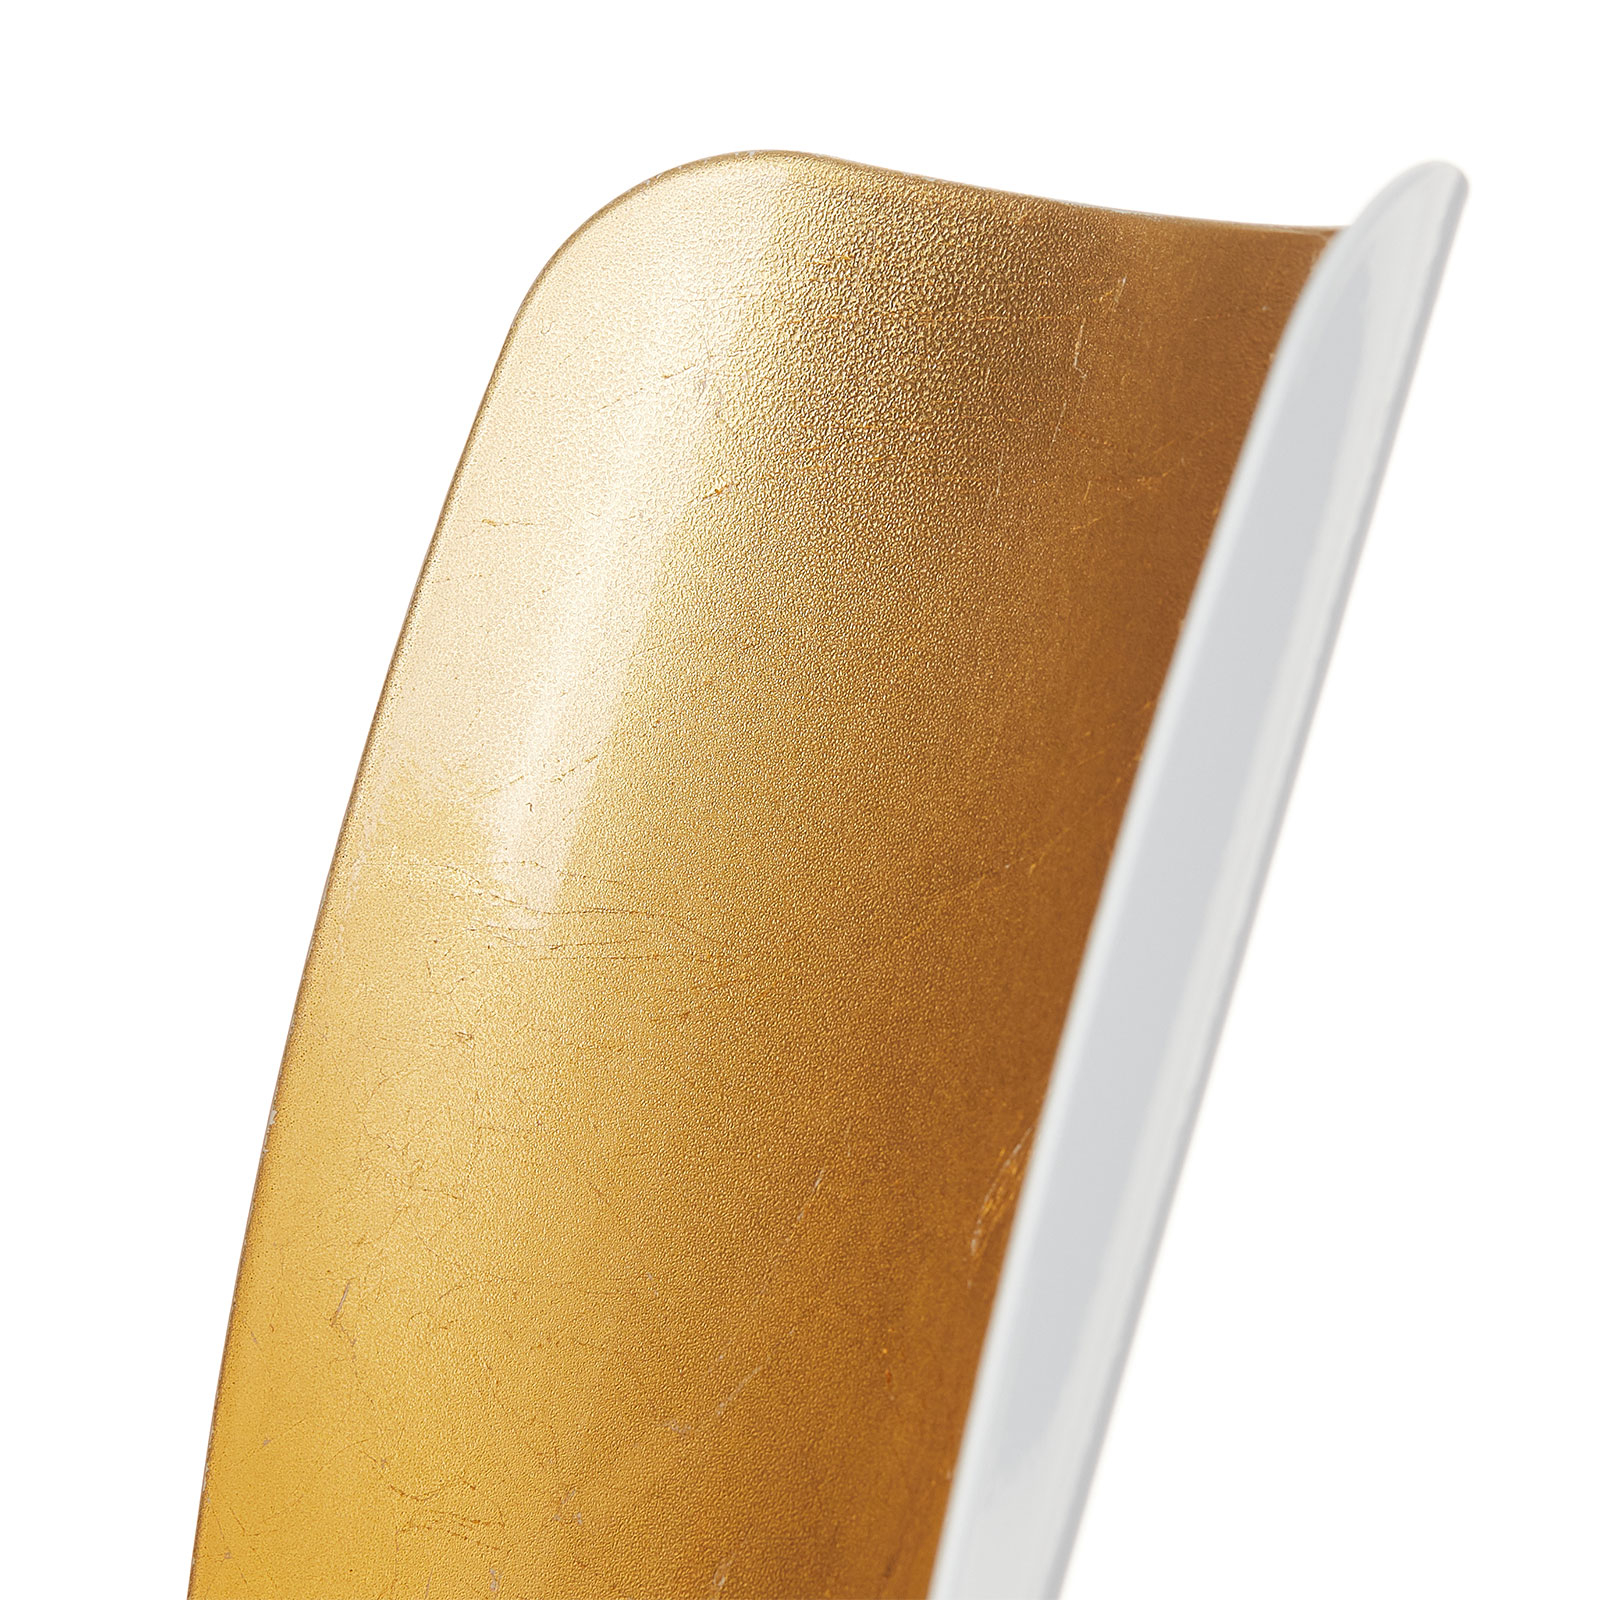 Table lamp Tropic with gold leaf